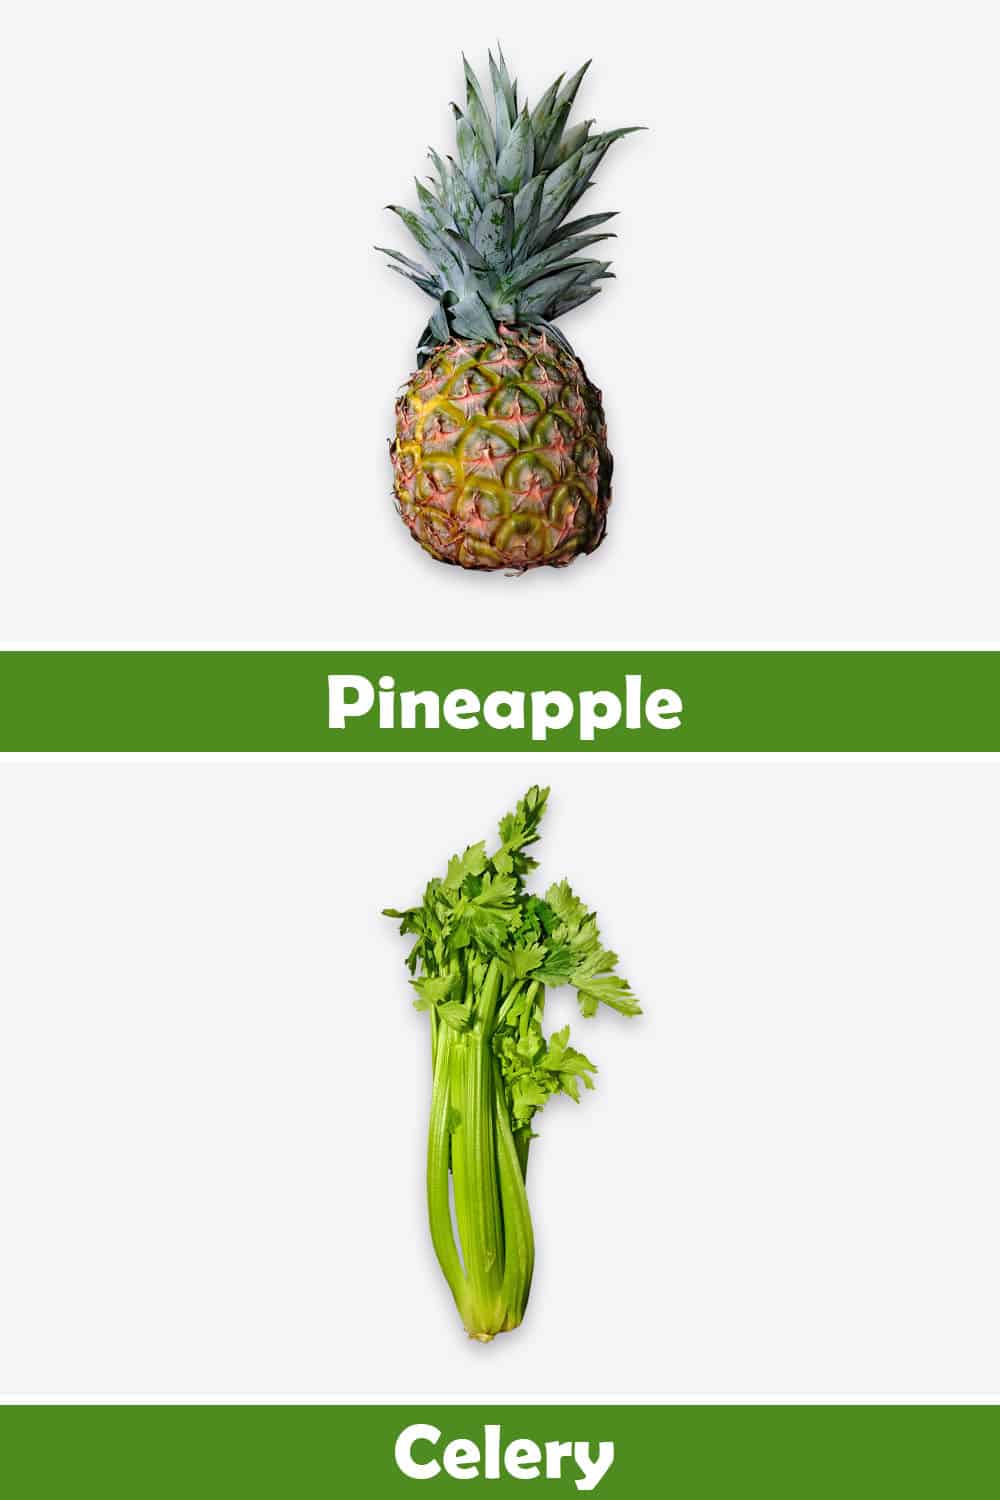 PINEAPPLE AND CELERY